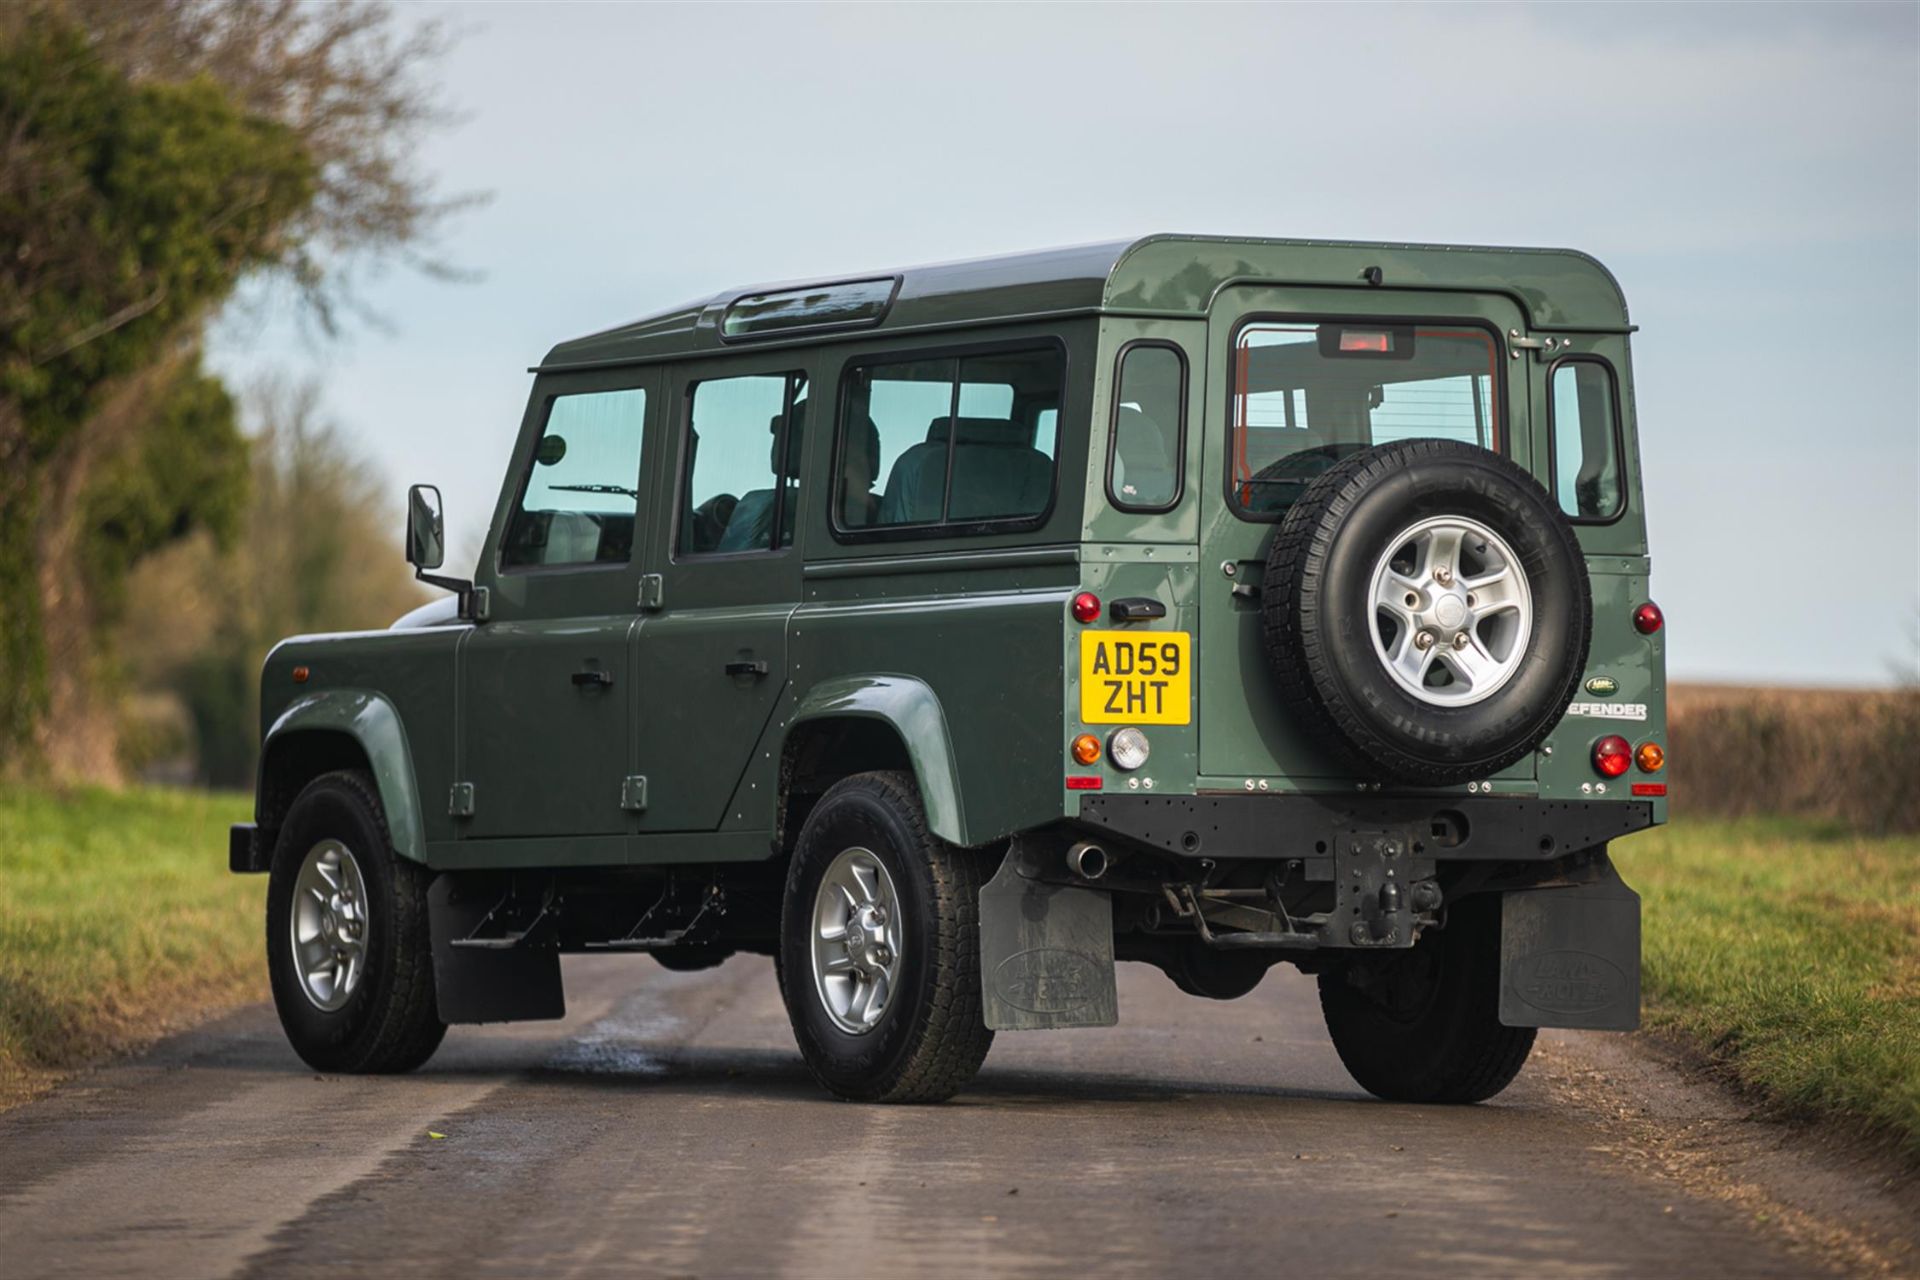 2010 Land Rover Defender 110 County - 15,623 Miles Previously used by HRH The Duke of Edinburgh - Image 4 of 10